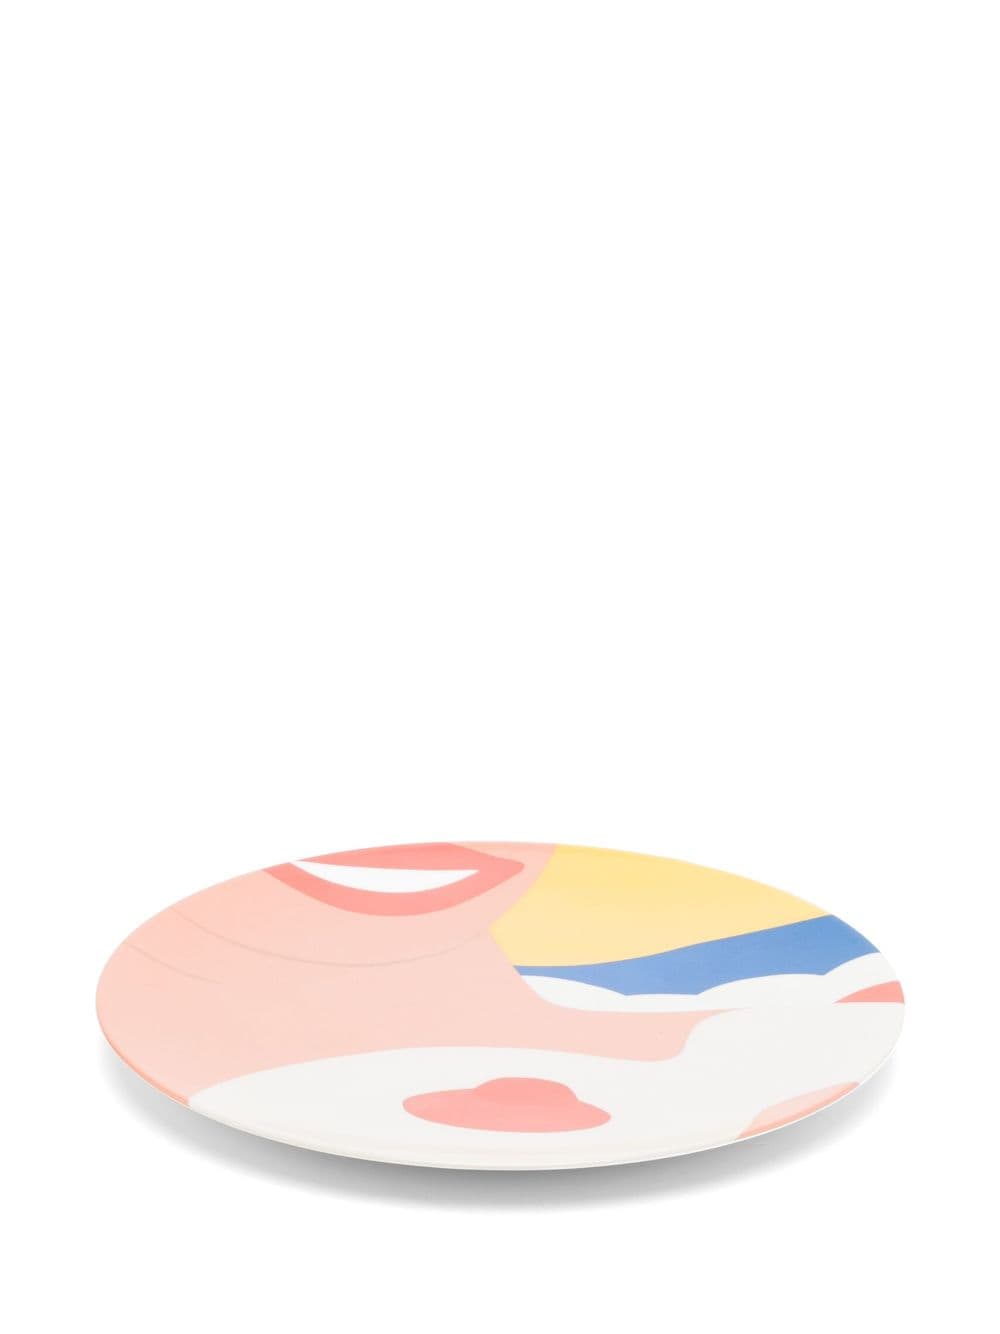 Image 2 of Ligne Blanche Nude Wesselmann large plate